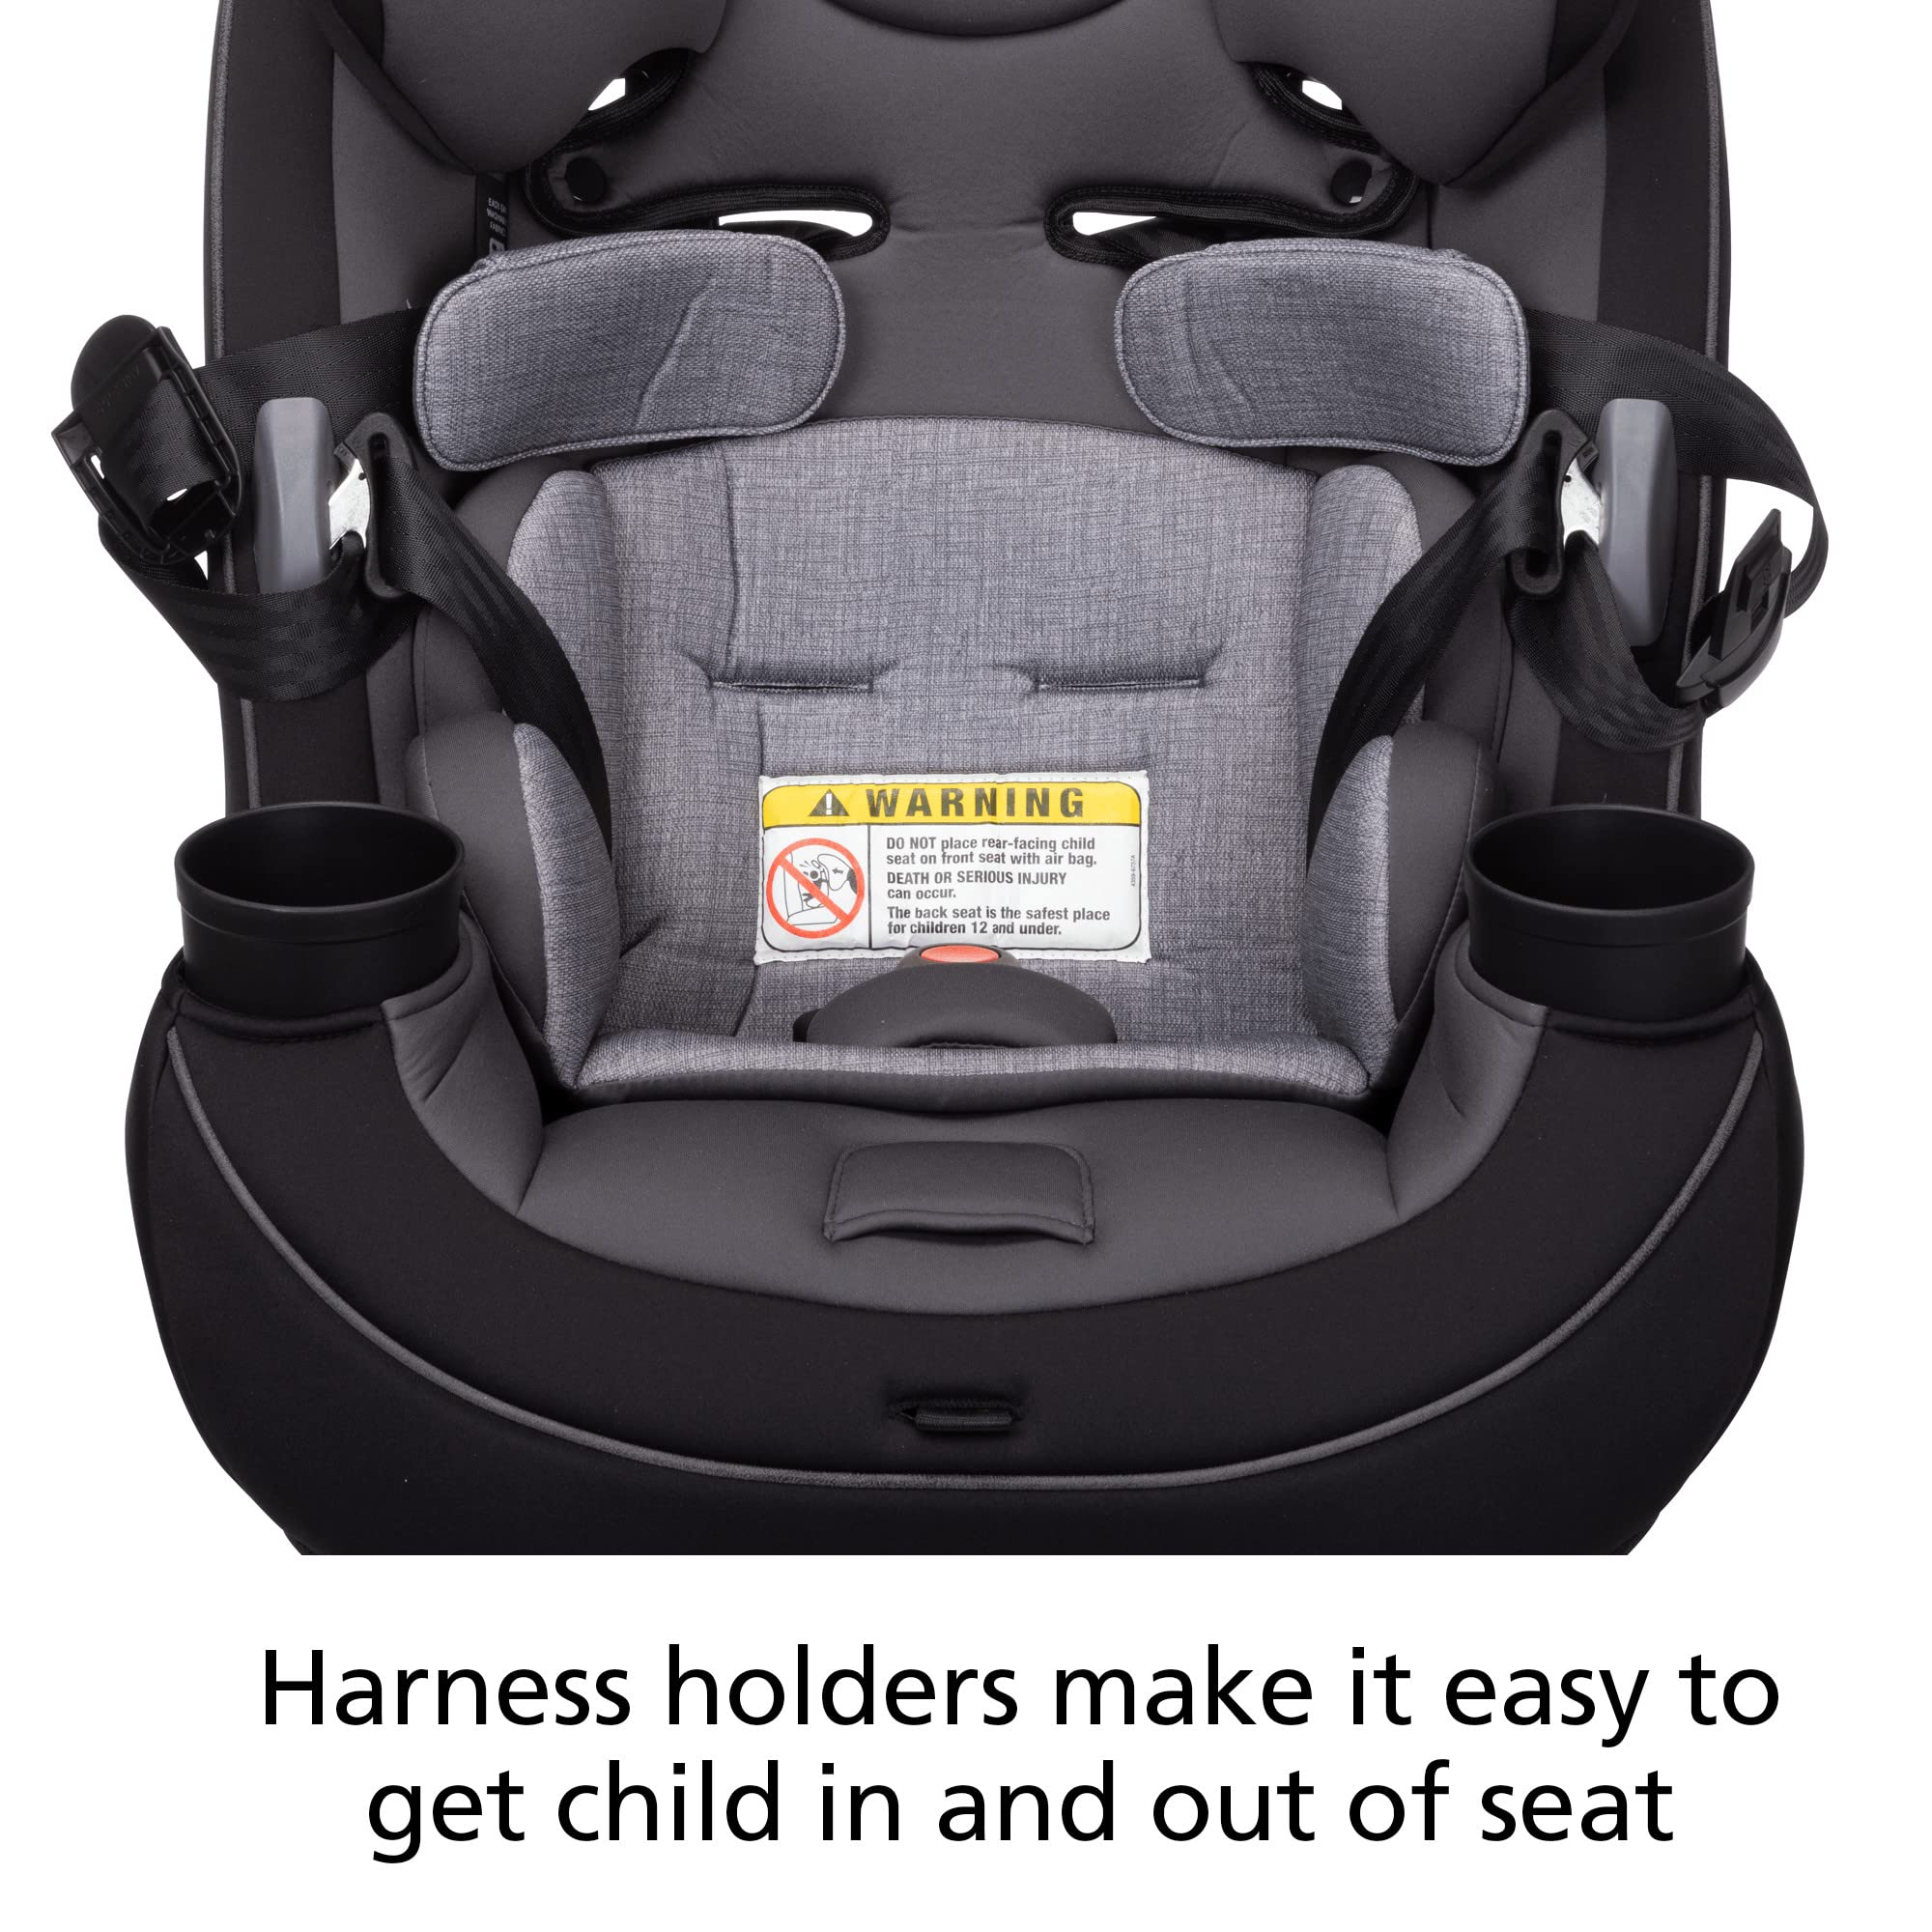 Safety 1st Grow and Go All-in-One Convertible Car Seat, Rear-facing 5-40 pounds, Forward-facing 22-65 pounds, and Belt-positioning booster 40-100 pounds, Vitamint